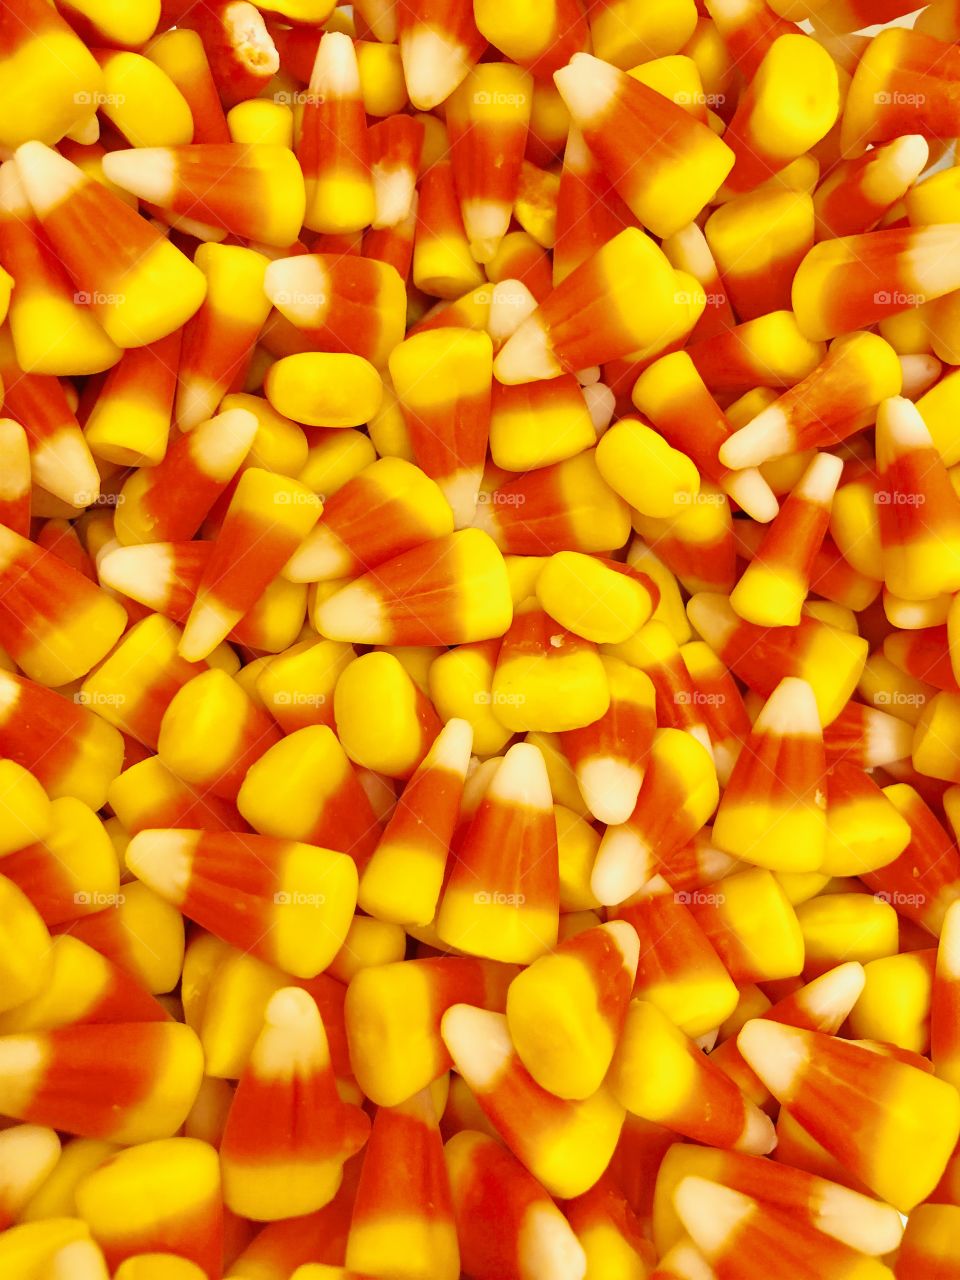 🧡Colorful candycorn with brilliant shades of yellow, orange, and white. It doesn't have to be Halloween to enjoy this sugary treat!🧡